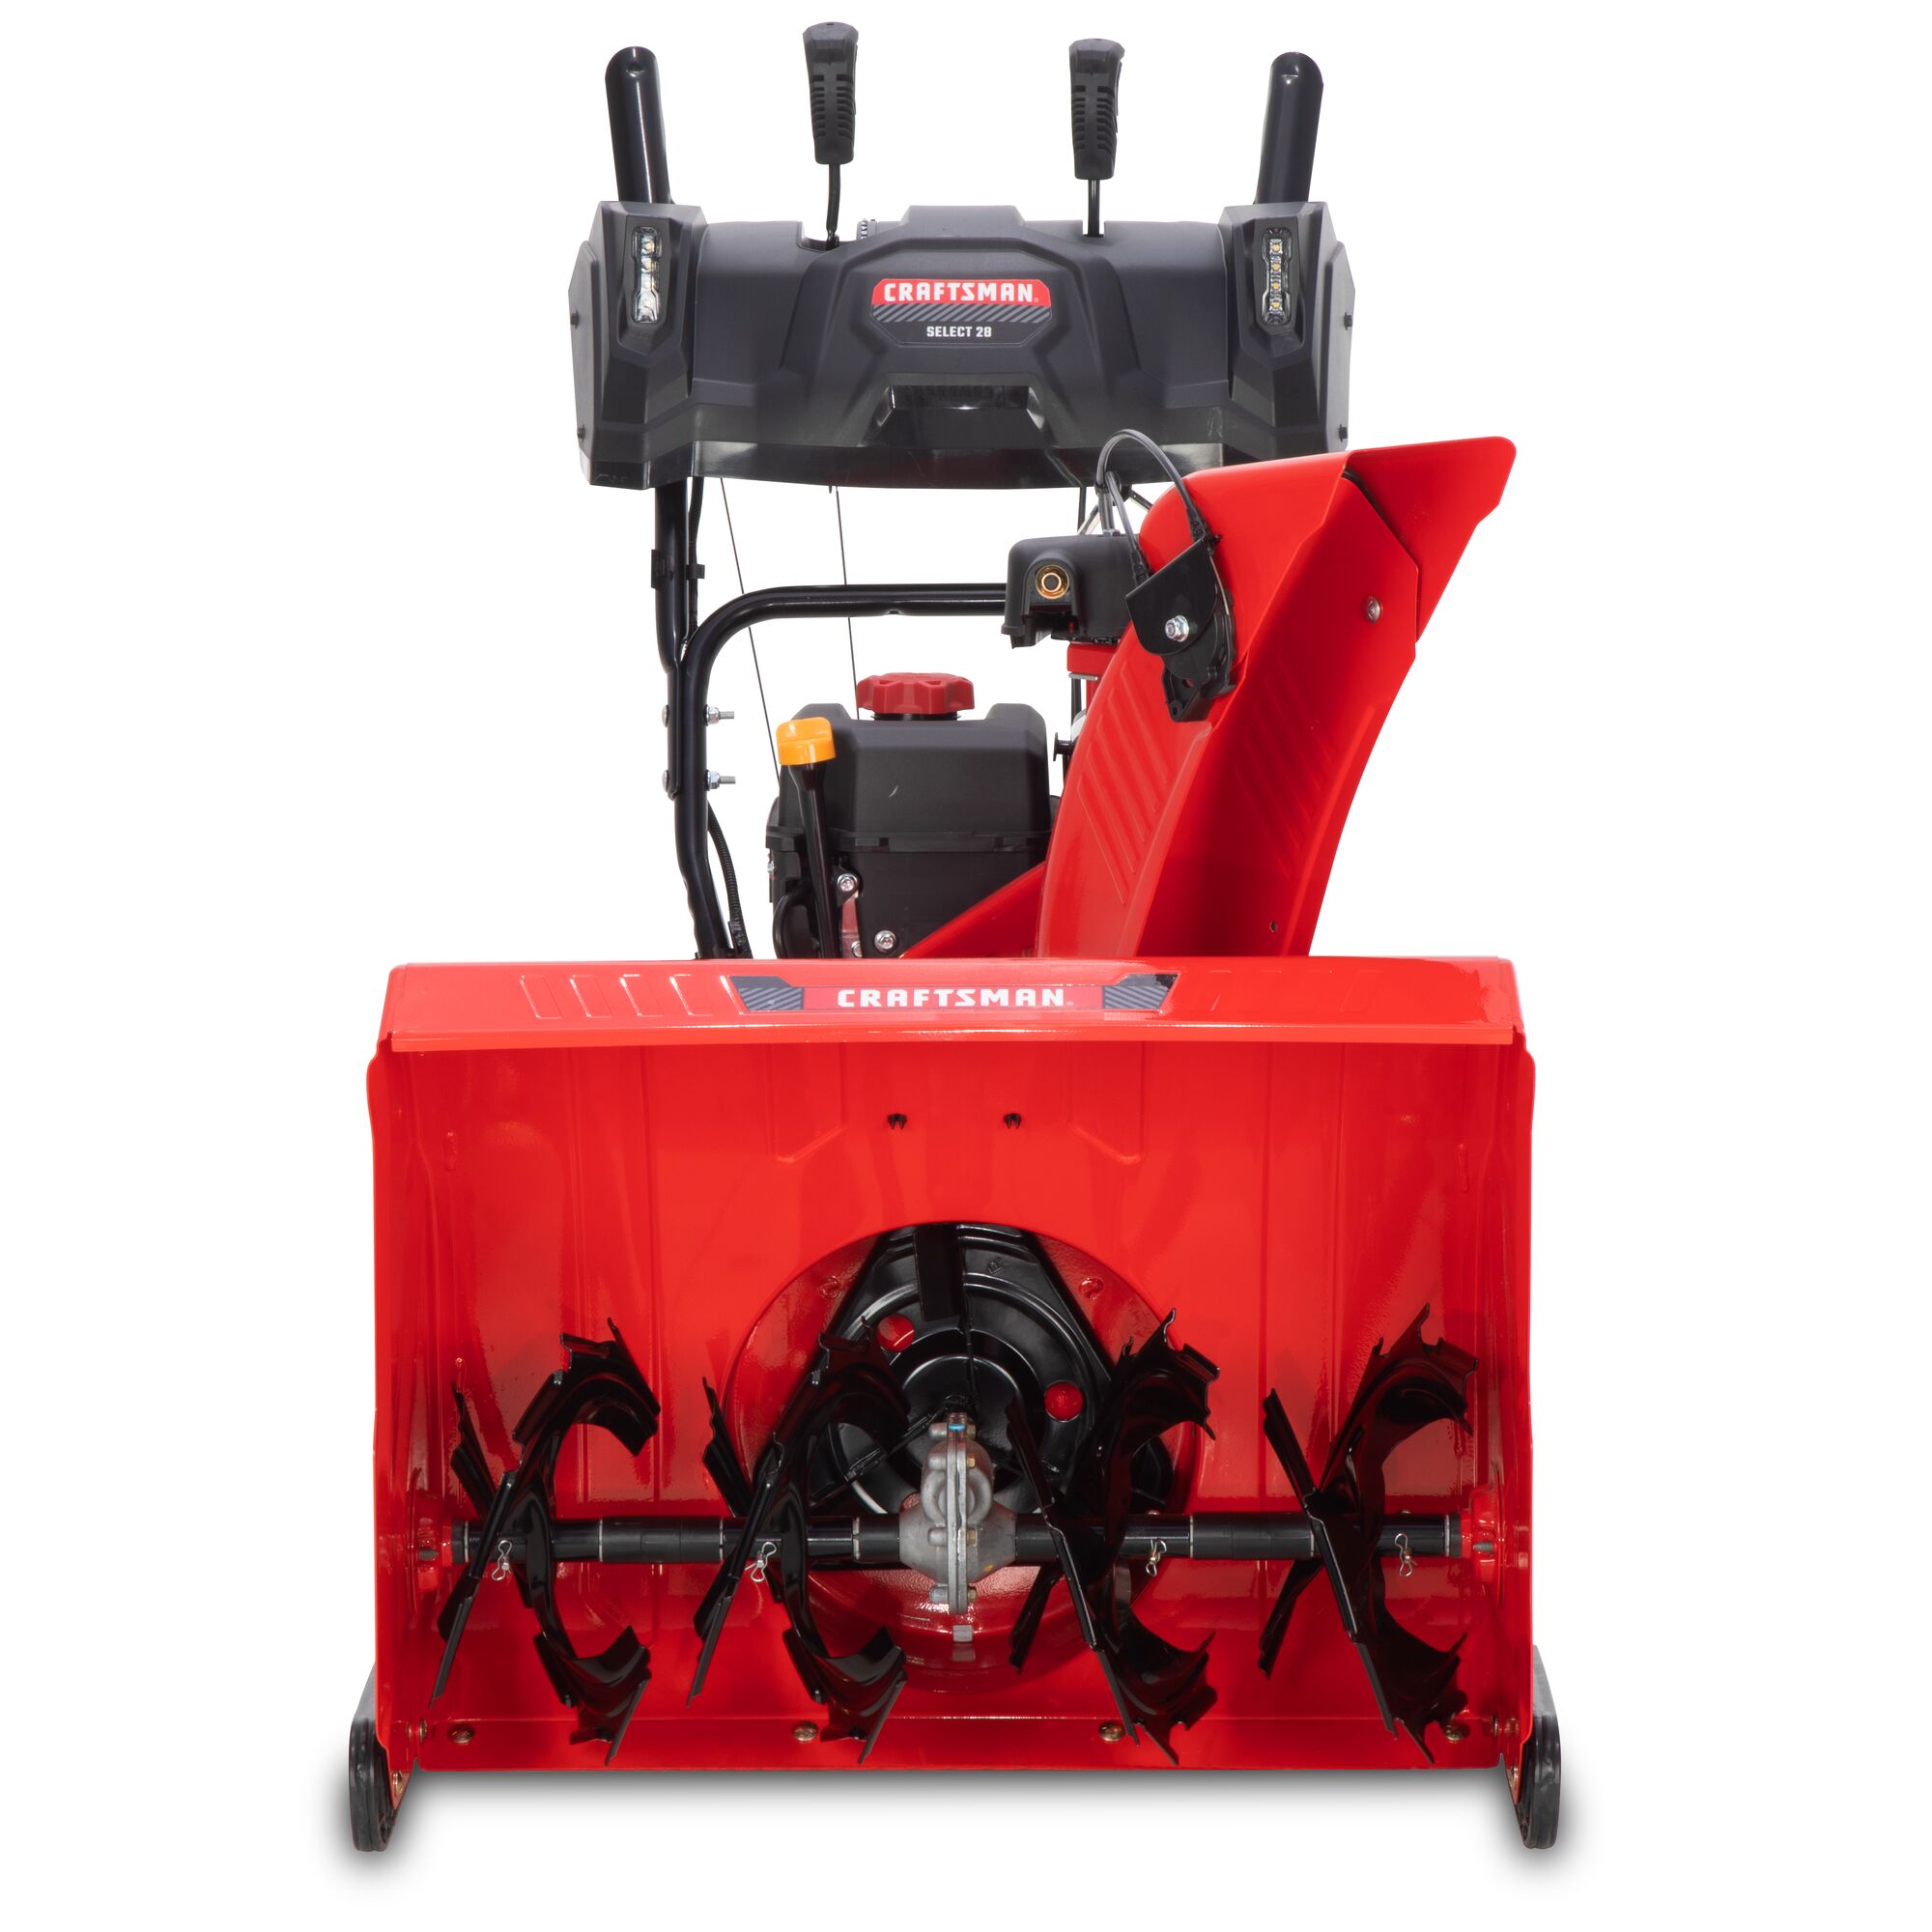 CRAFTSMAN Select 28 Snow Blower on white background